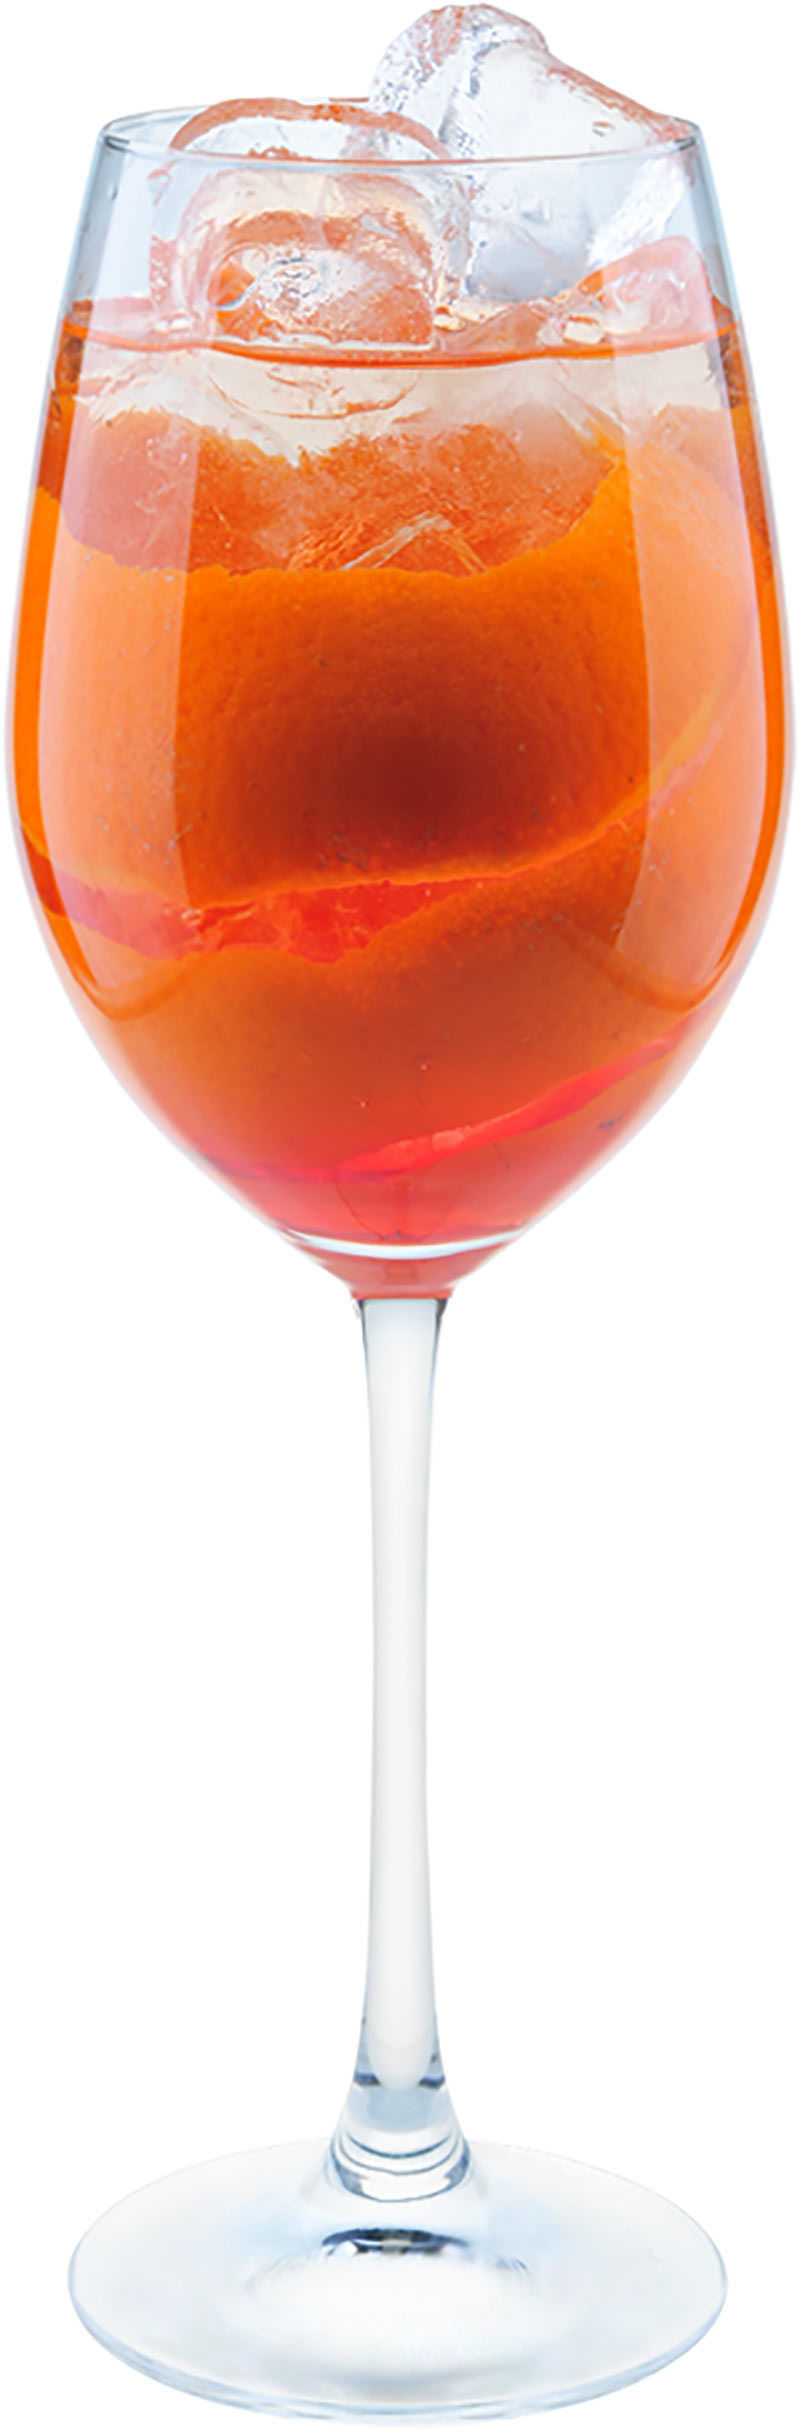 How to Make the Milan Spritz